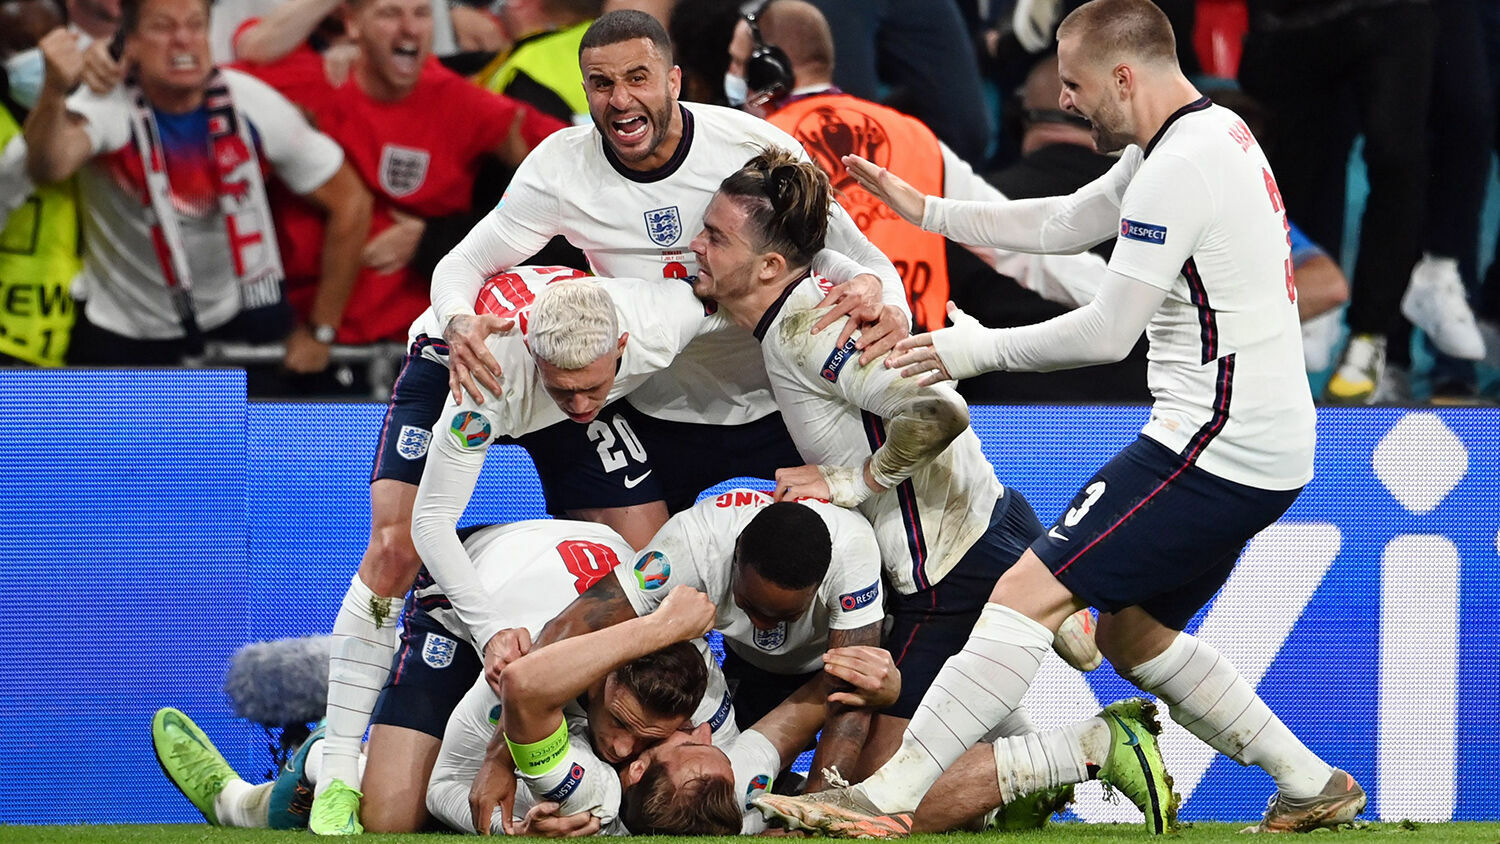 England reached the final of Euro 2020